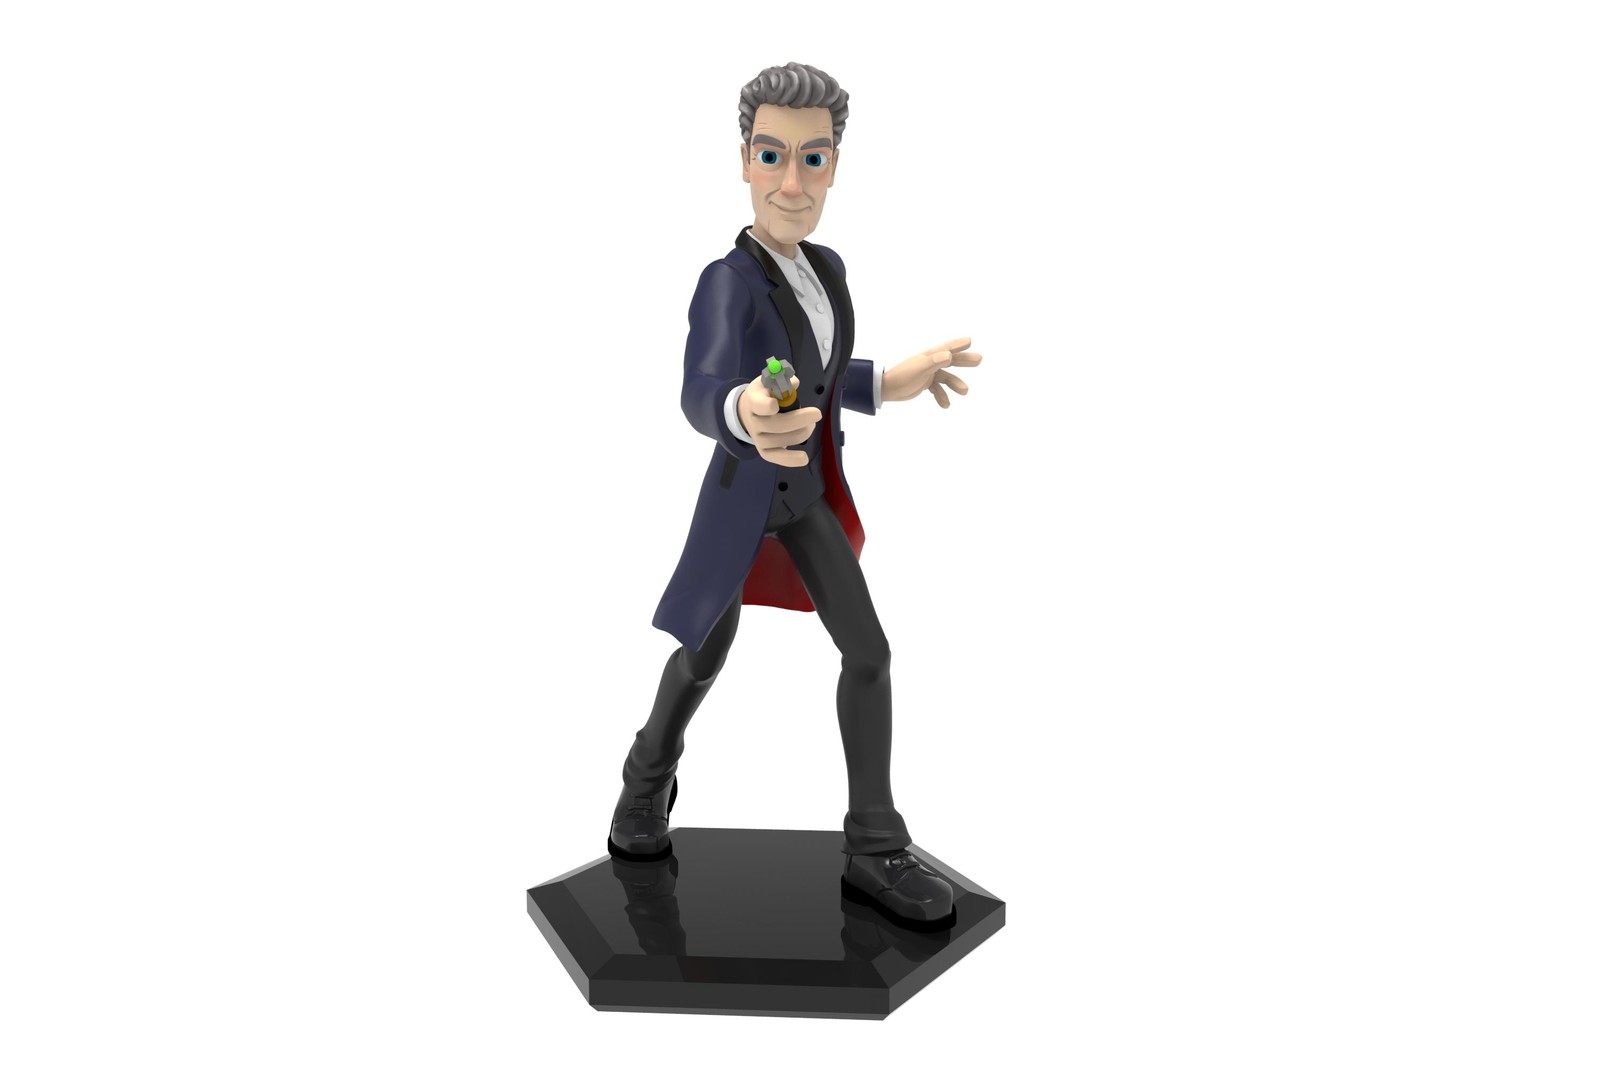 The Doctor. 
Peter Capaldi version 12th doctor (or is that 13th)